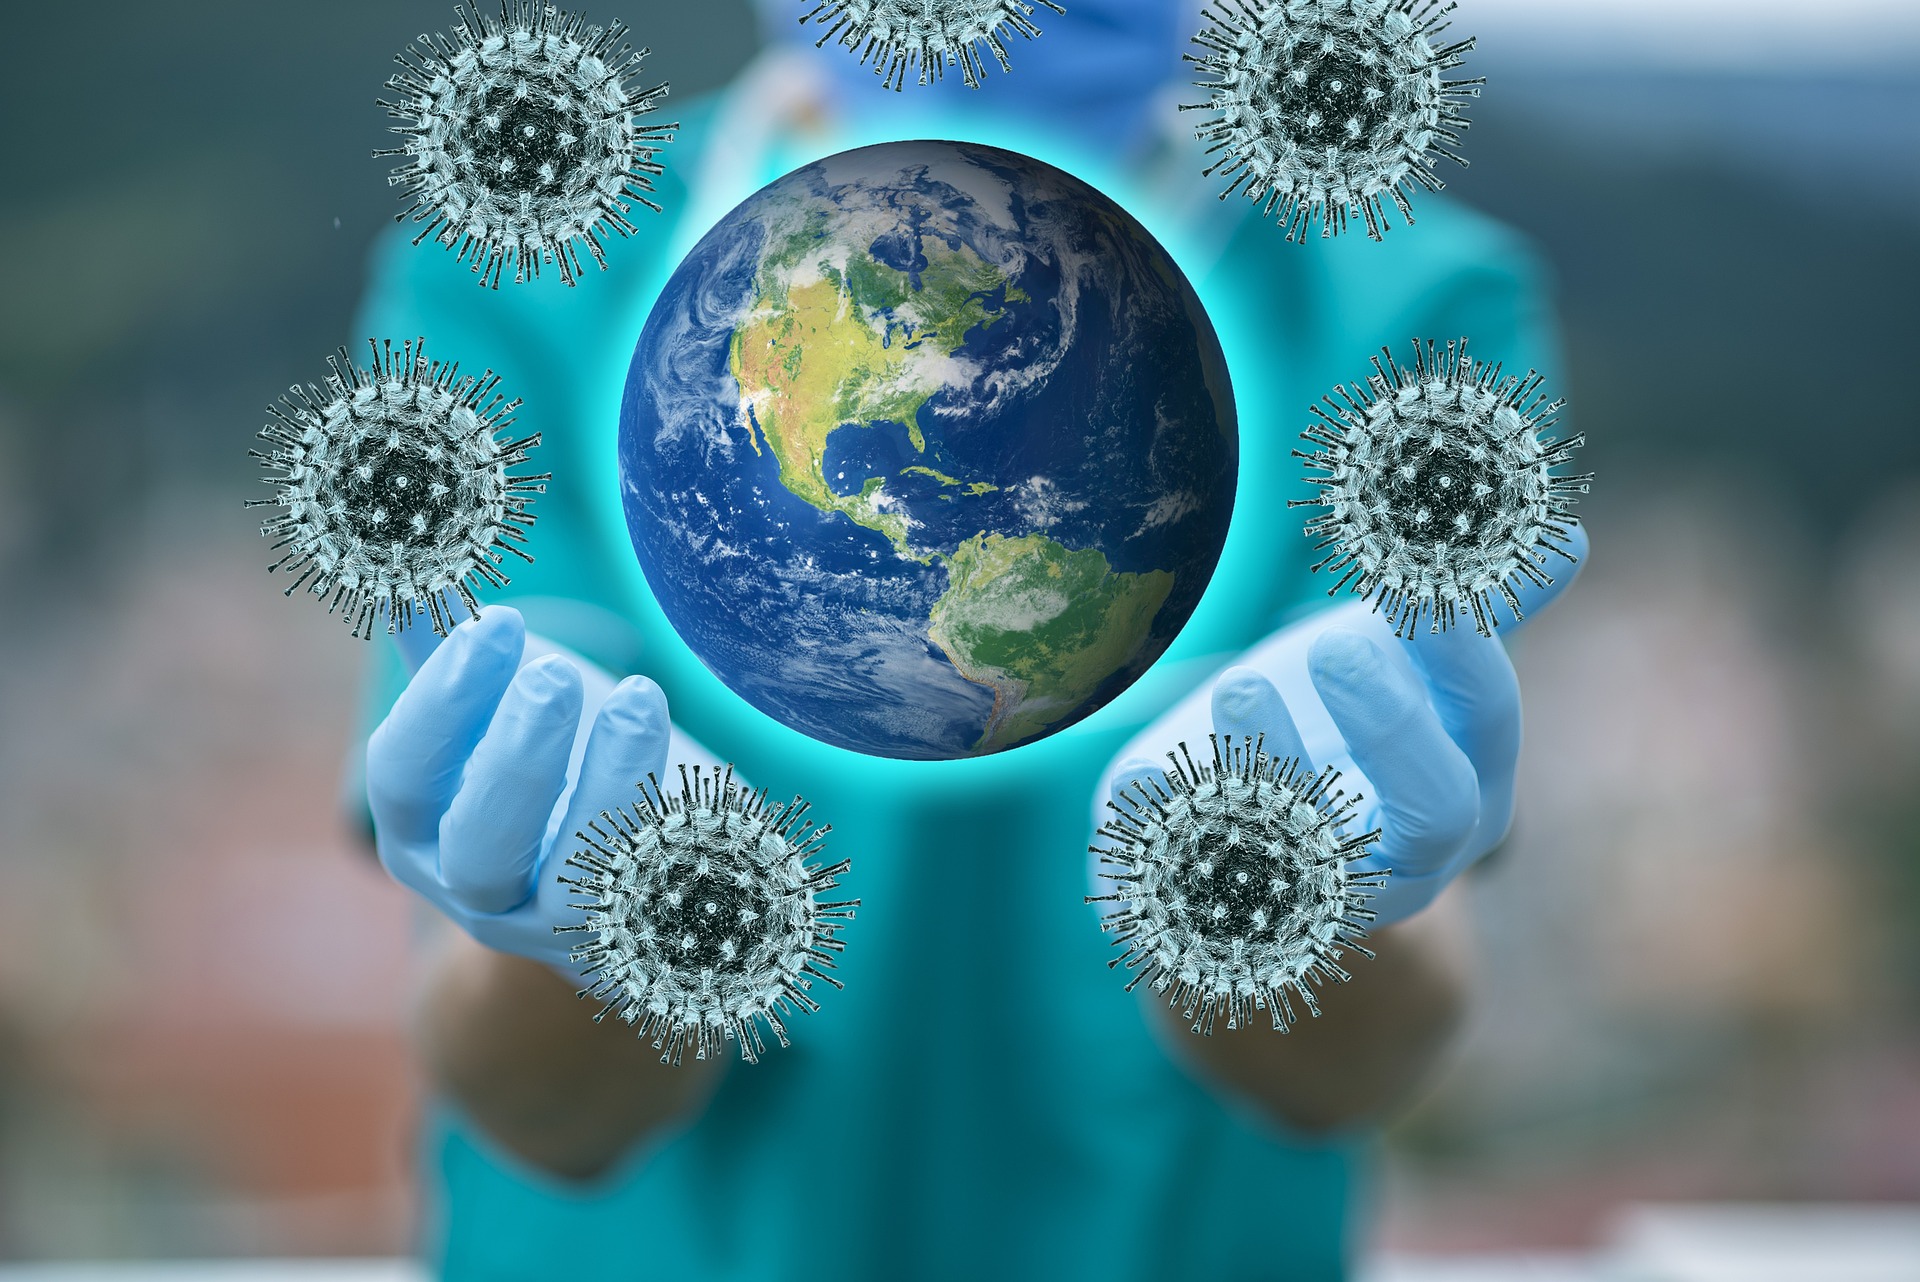 person in hospital gown and gloves juggling covid virus graphics and an earth